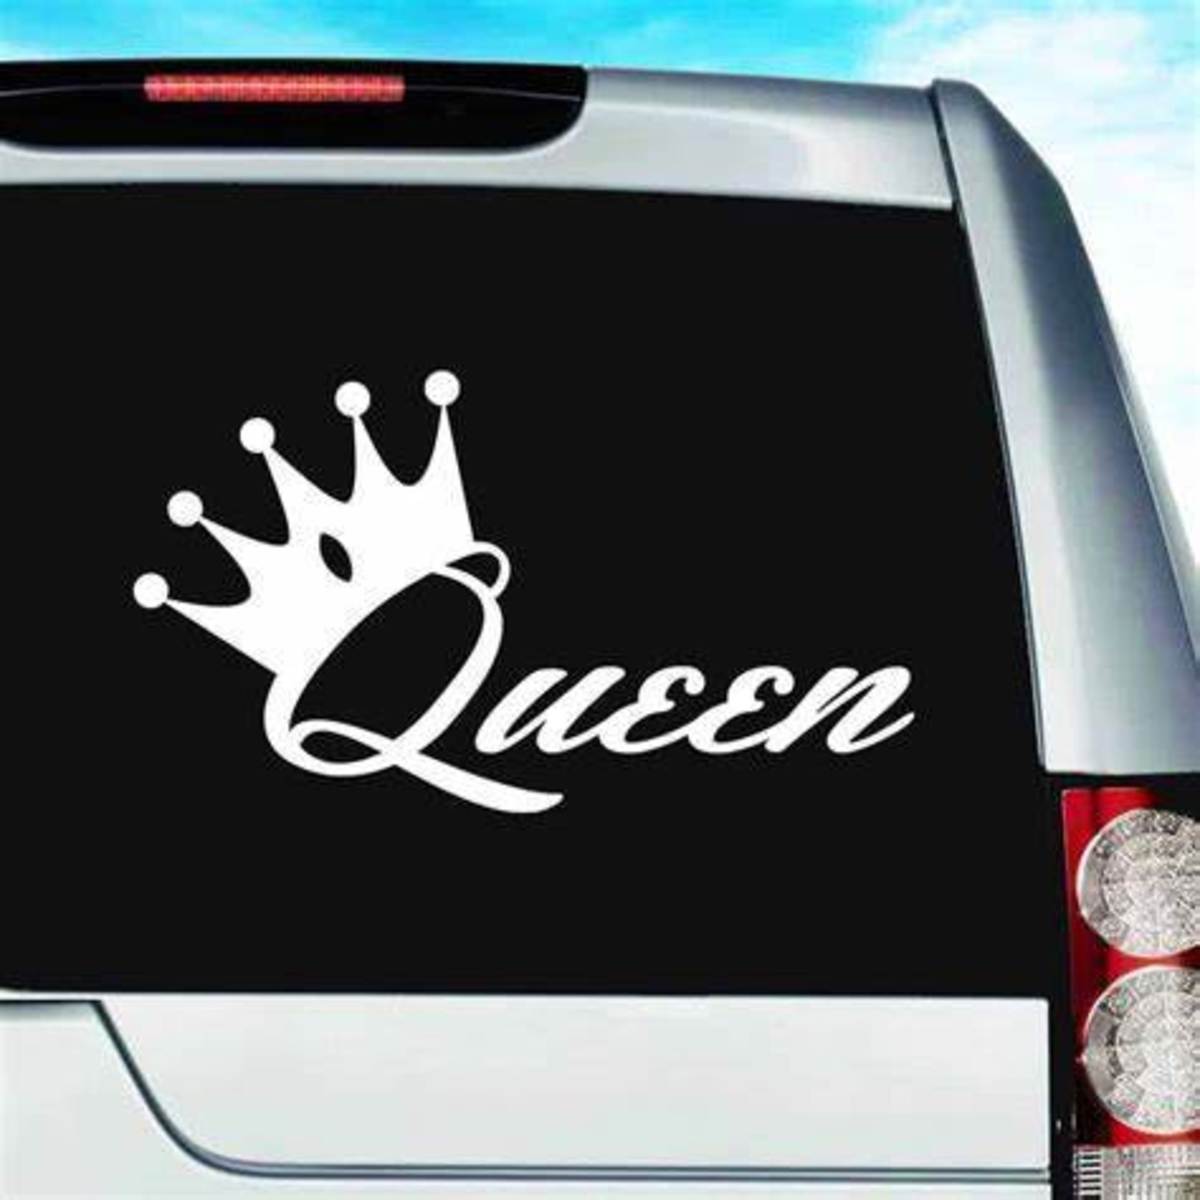 Vinyl decals require special application so that the decal goes on evenly